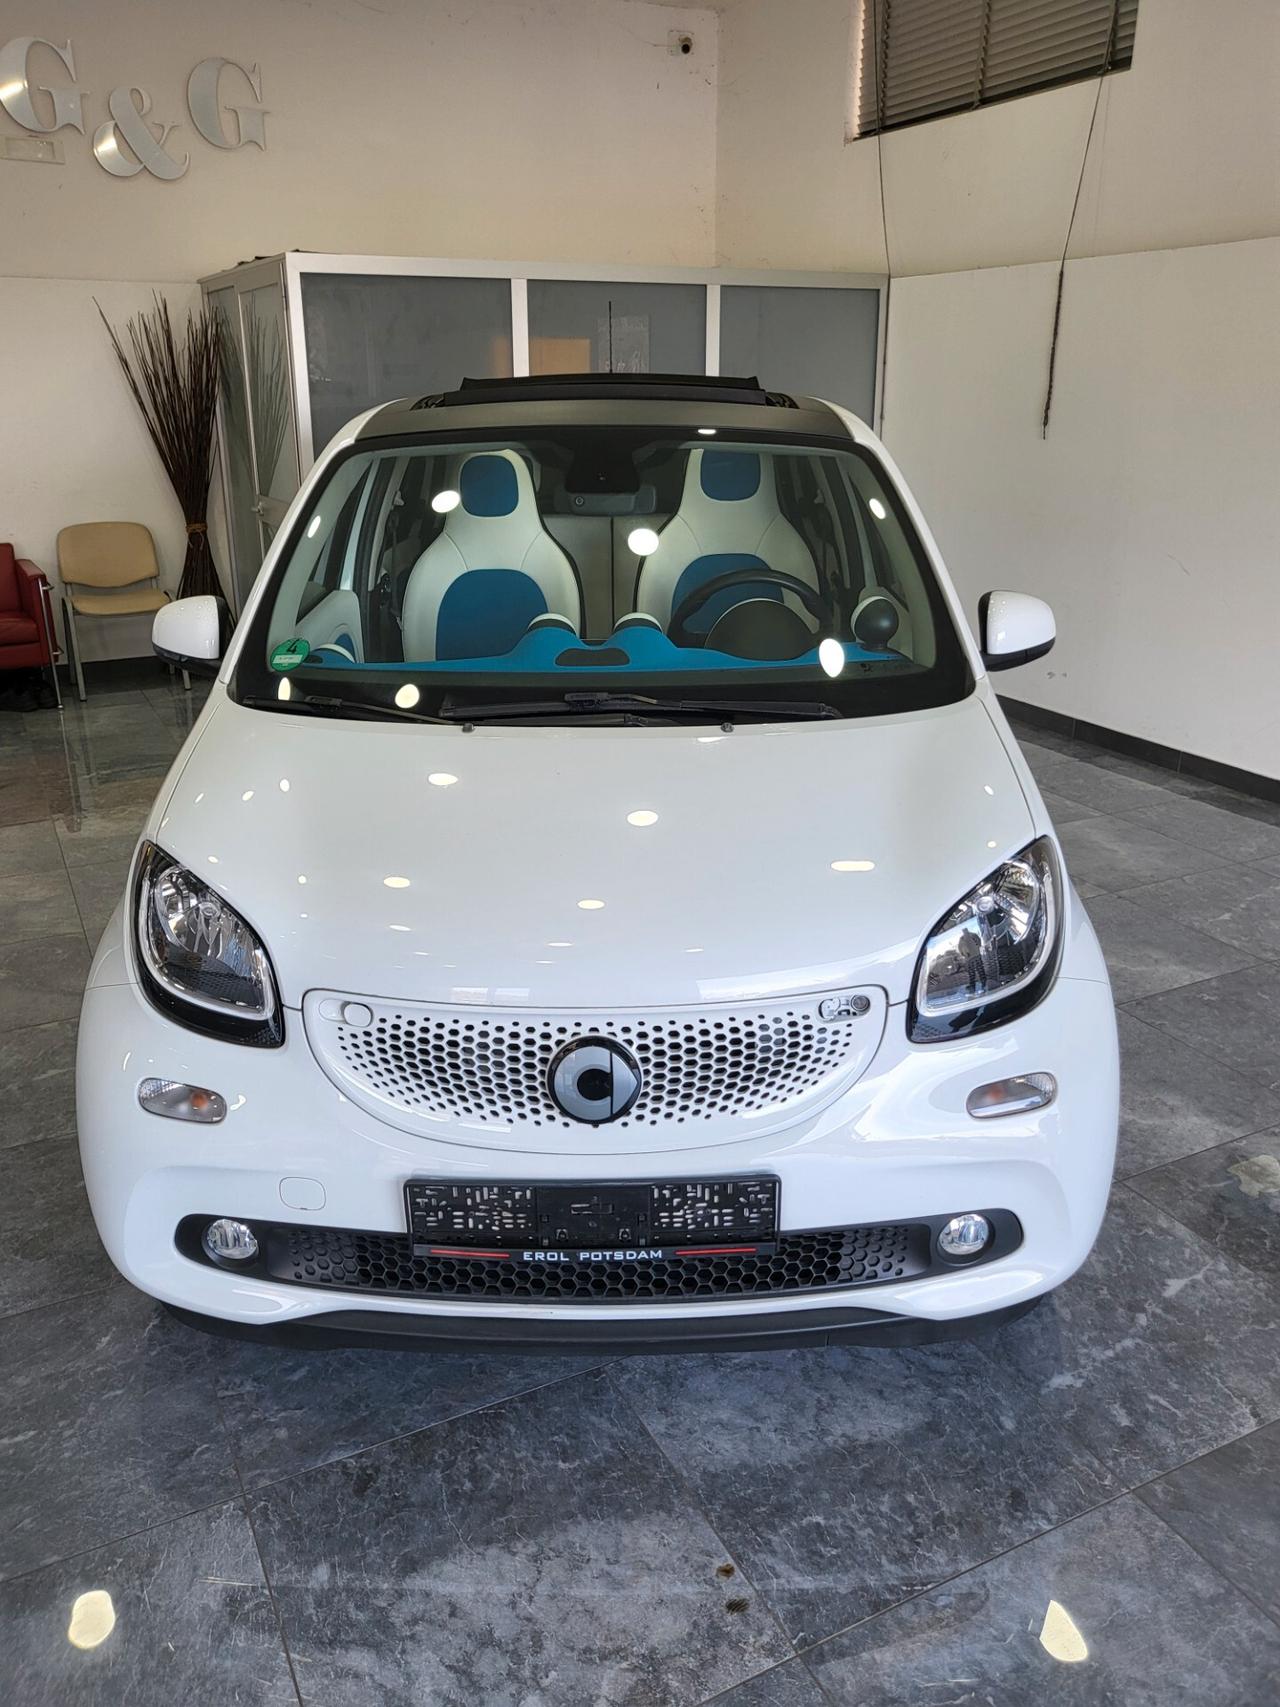 Smart ForFour Proxy